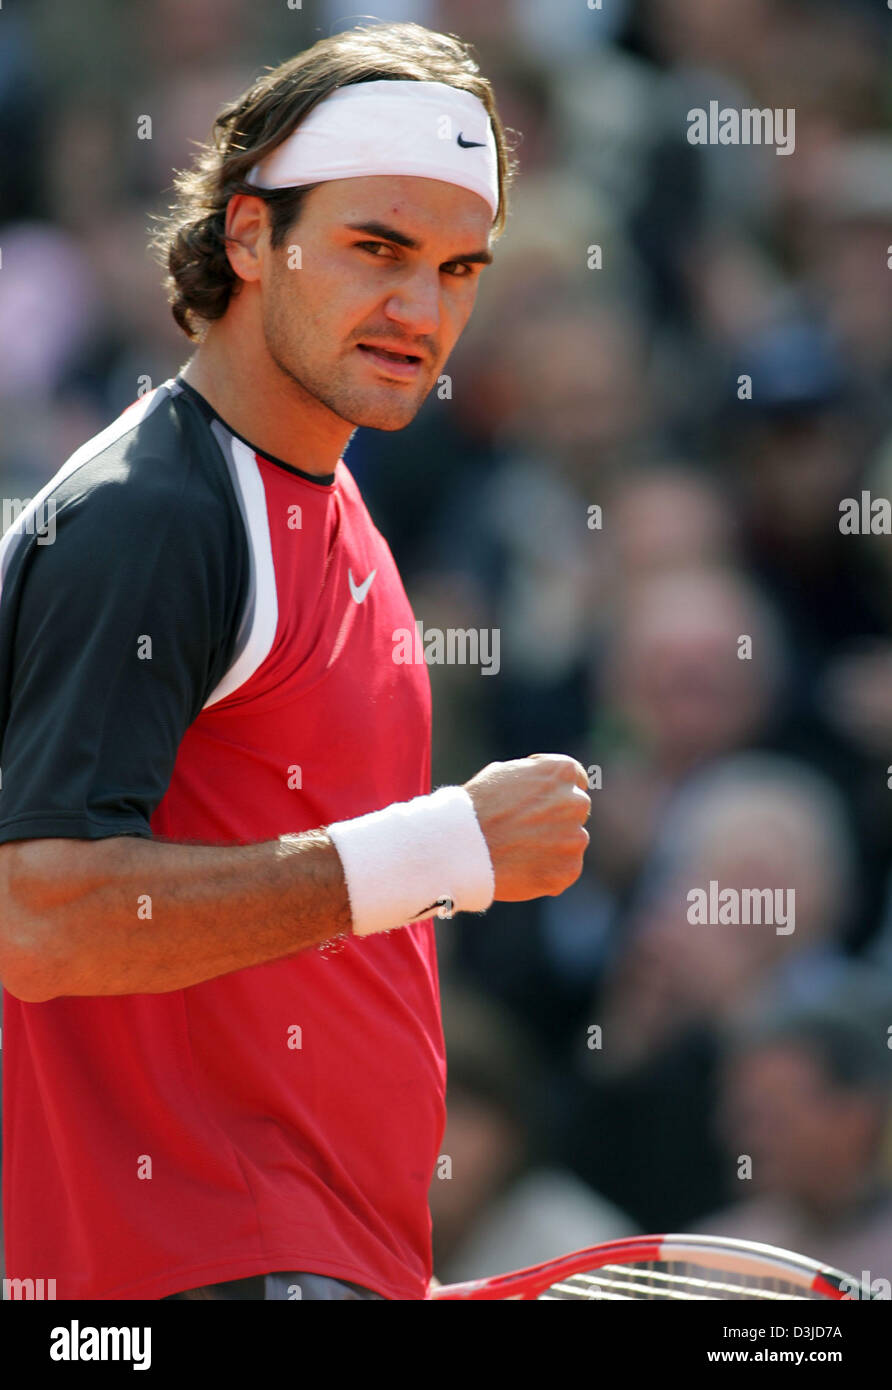 Swiss tennis pro Roger Federer strikes a pose after his two set victory against Argentinian Guillermo Coria at the ATP Tennis Masters in Hamburg, Germany, Friday 13 May 2005. Federer won the match 6-4 and 7-6. Stock Photo